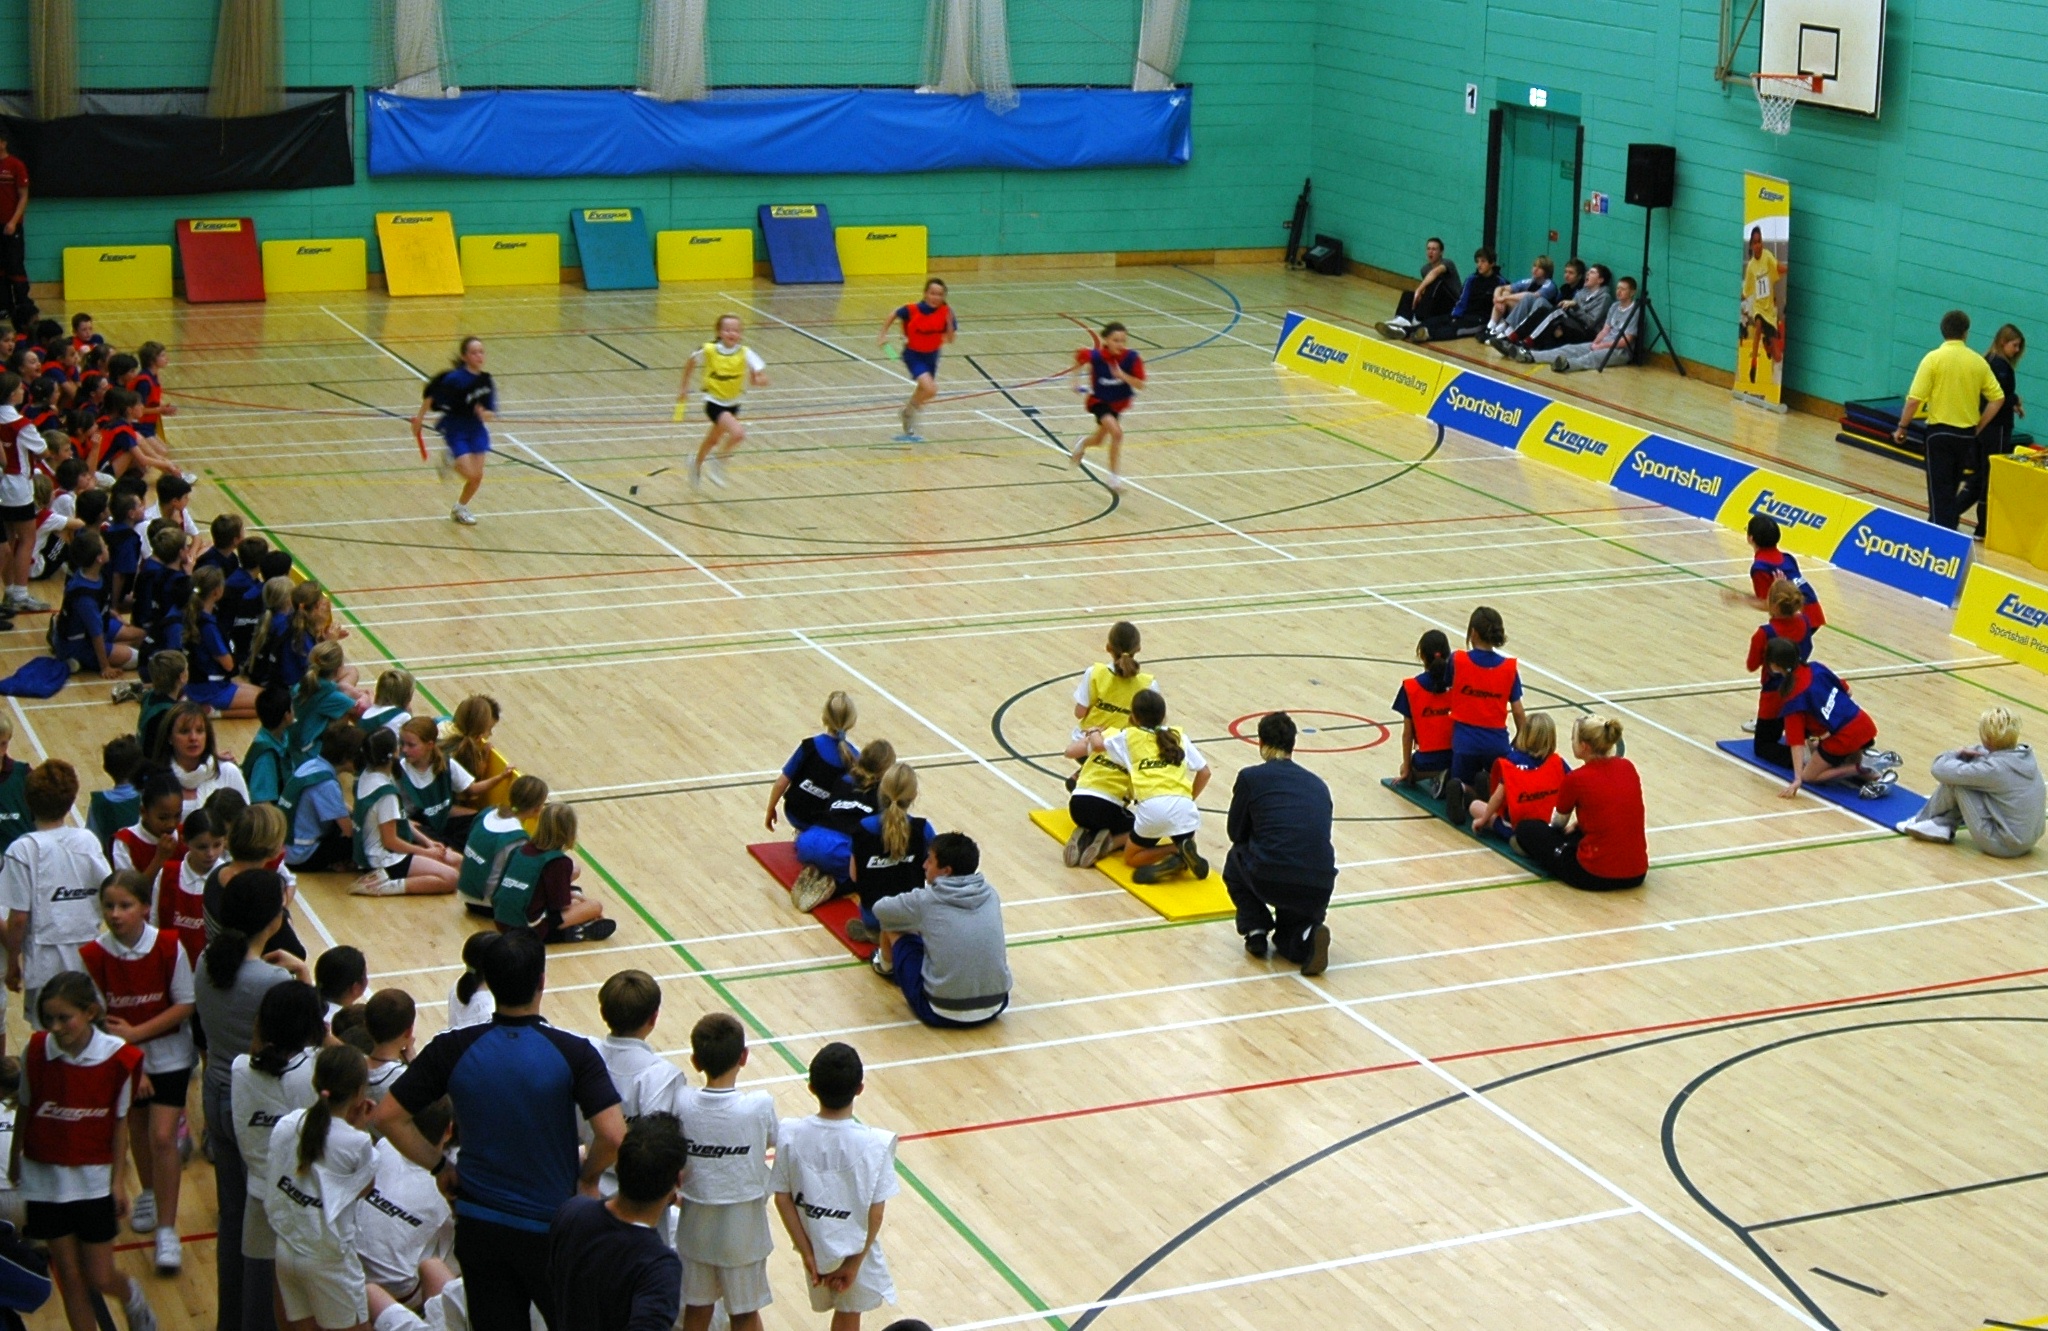 Children taking part in relay activity in a sports hall